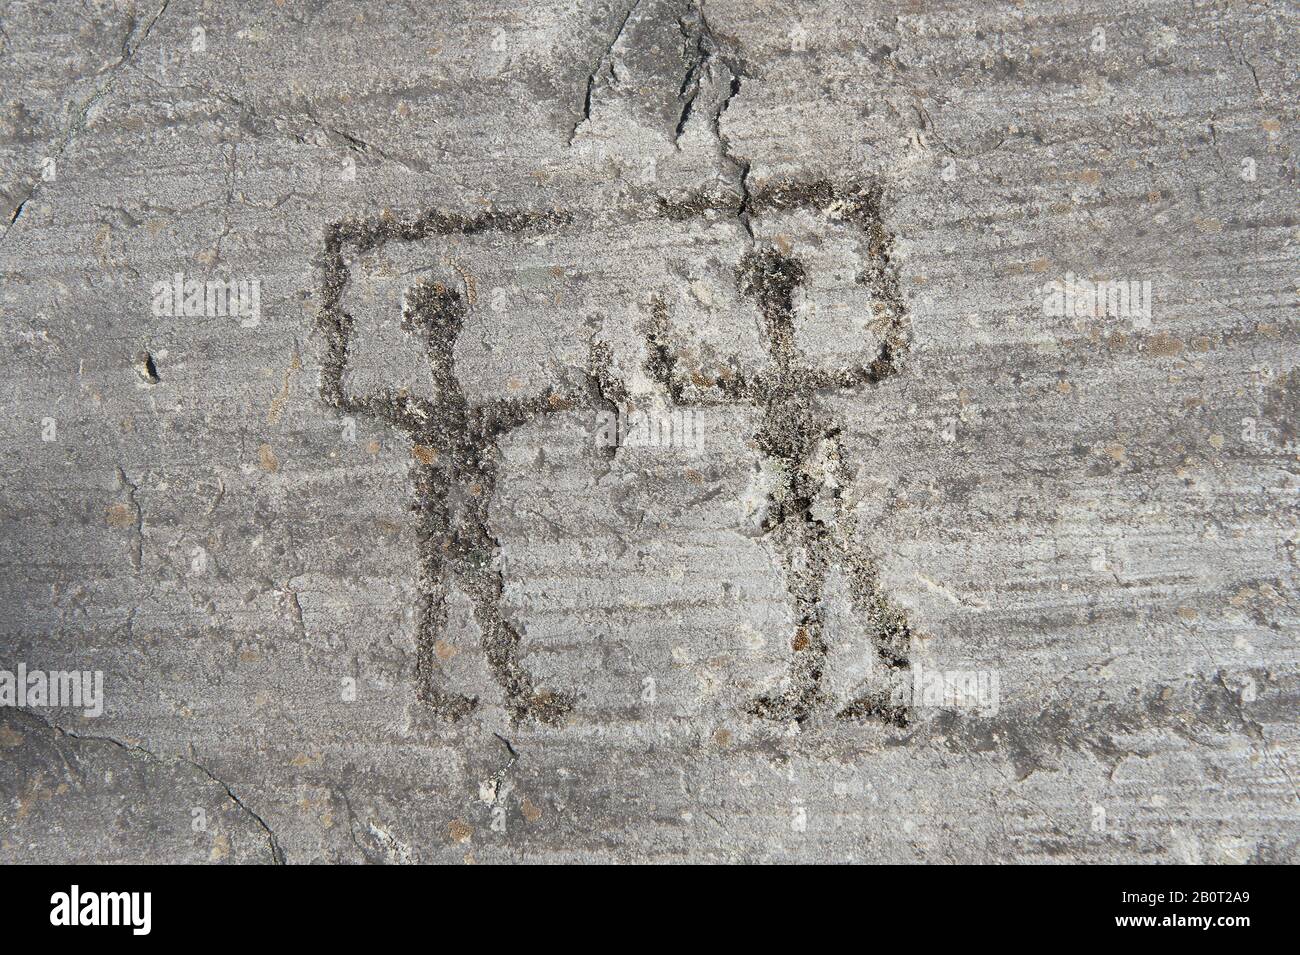 Petroglyph, rock carving, of two warriors with swords and small round shileds carved by the ancient Camuni people in the iron age between  900-1200 BC Stock Photo